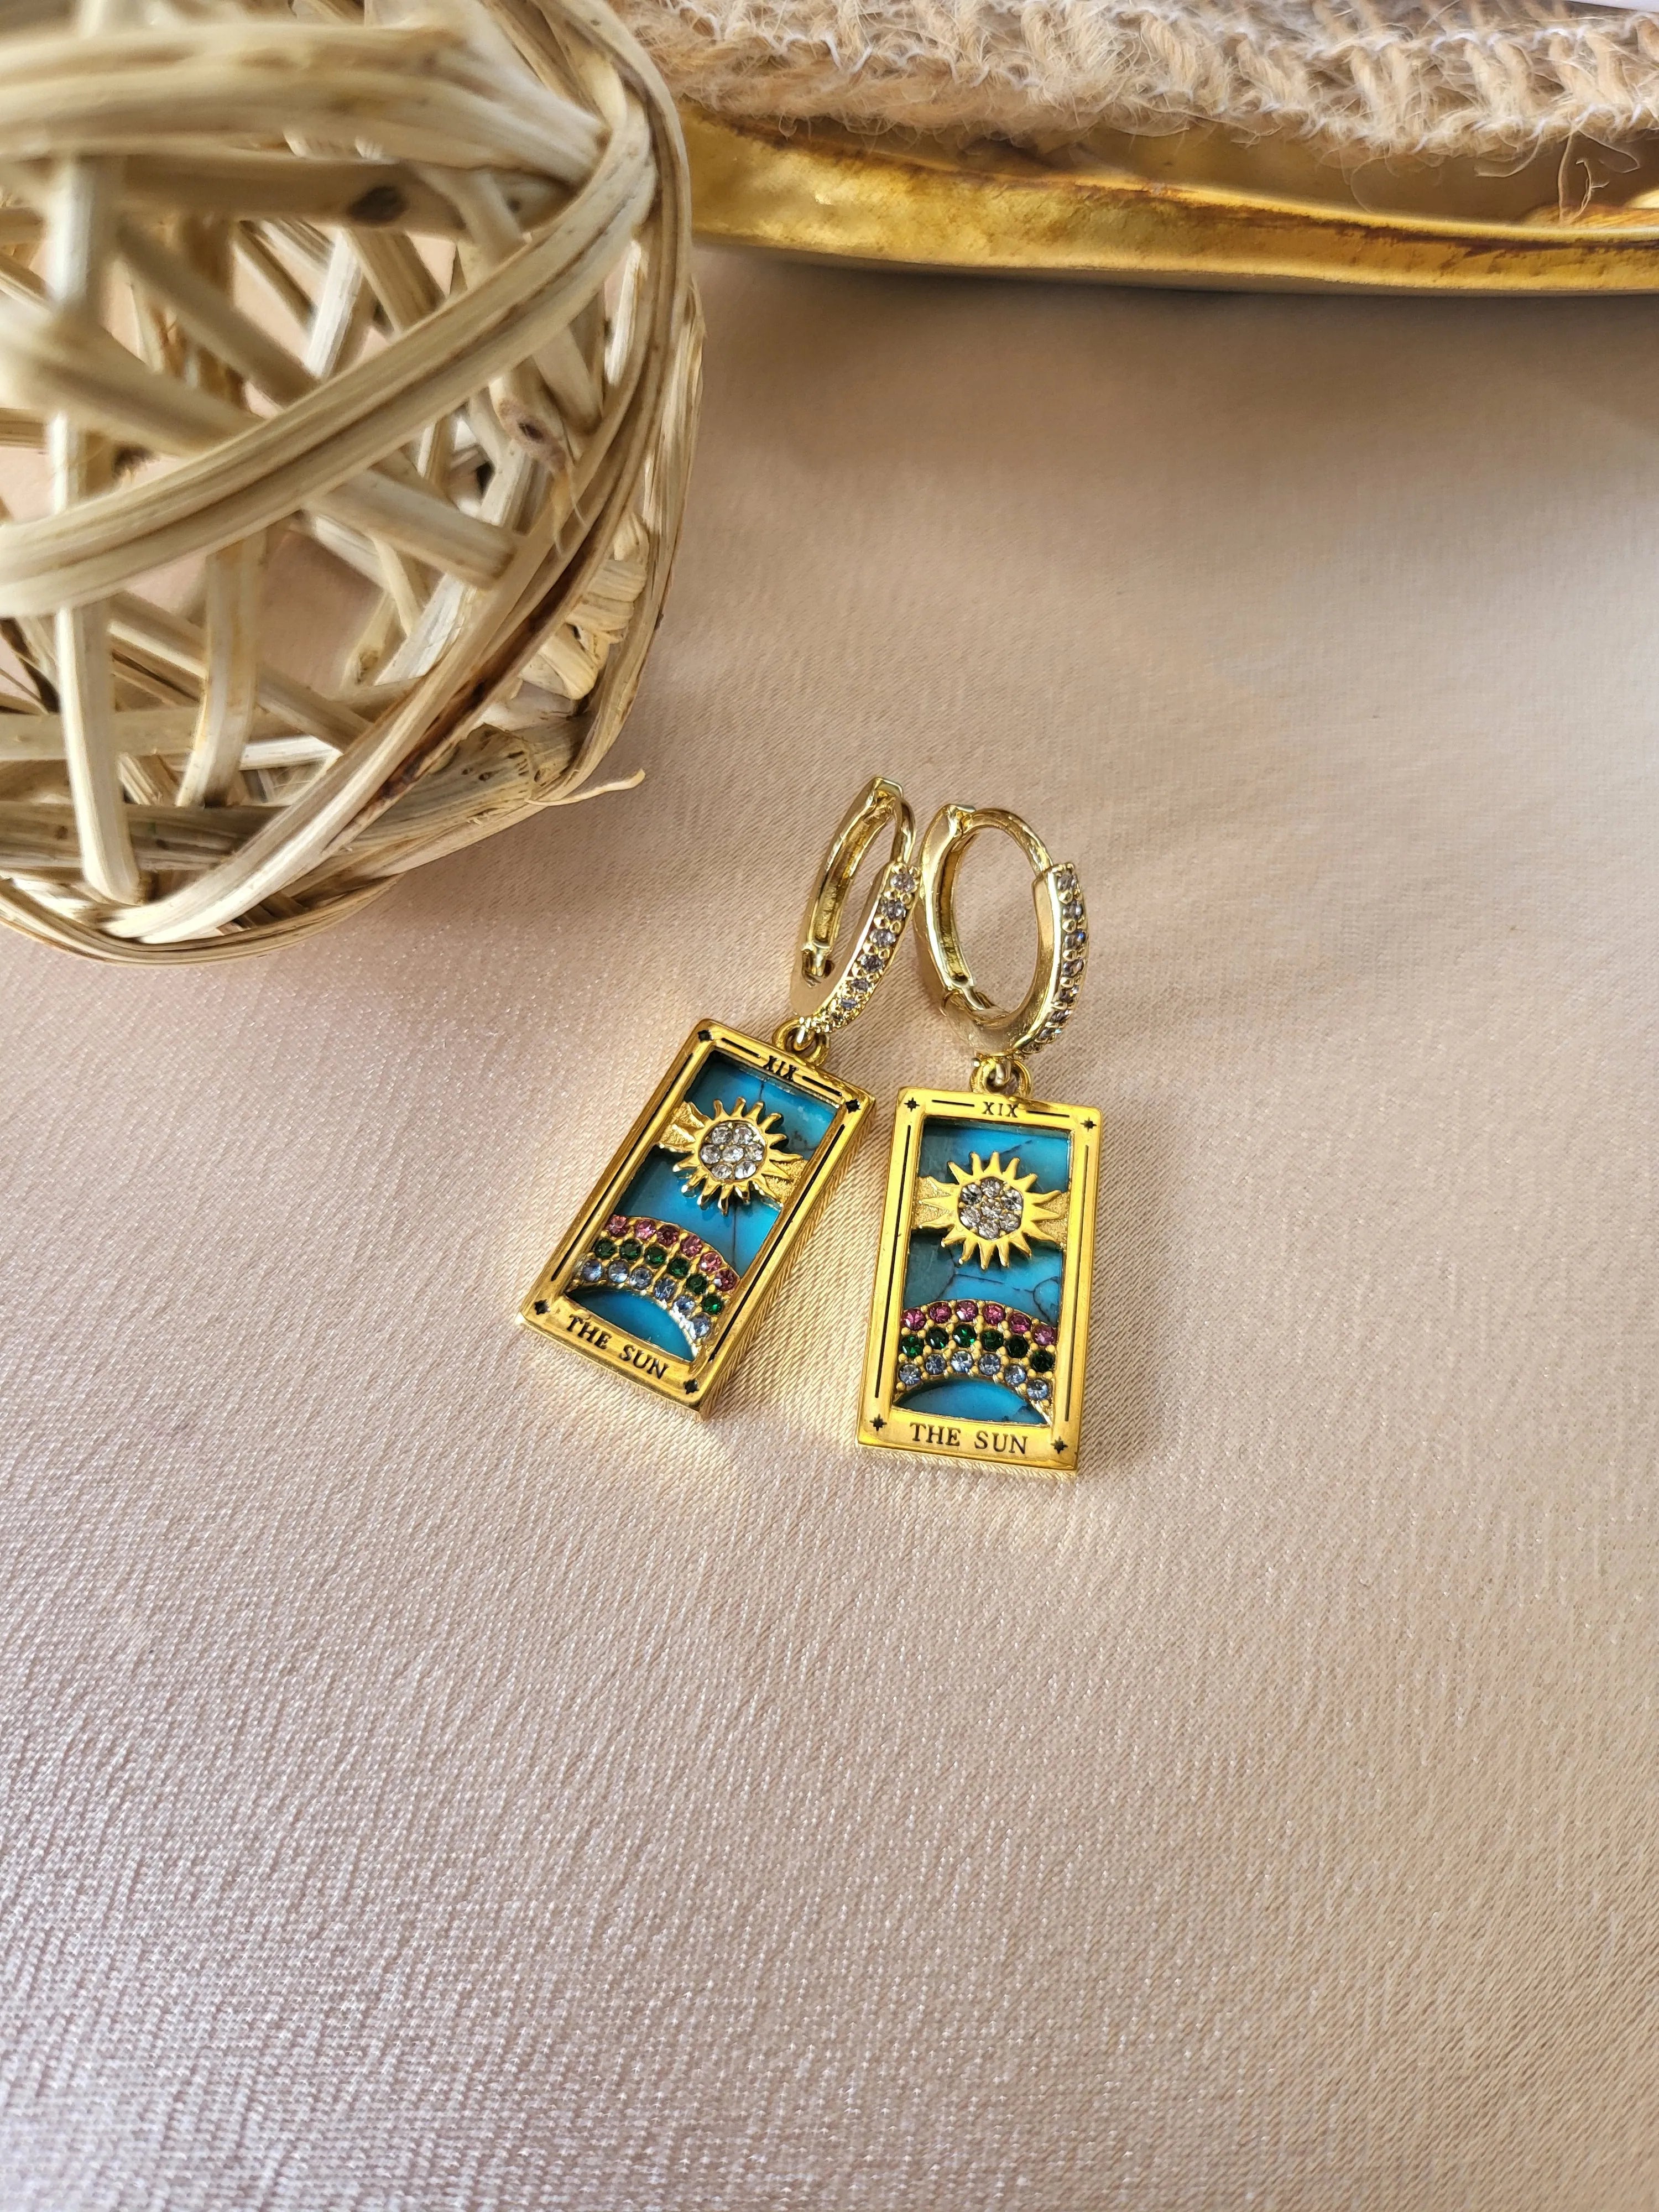 Amy Tarot Earrings product images.